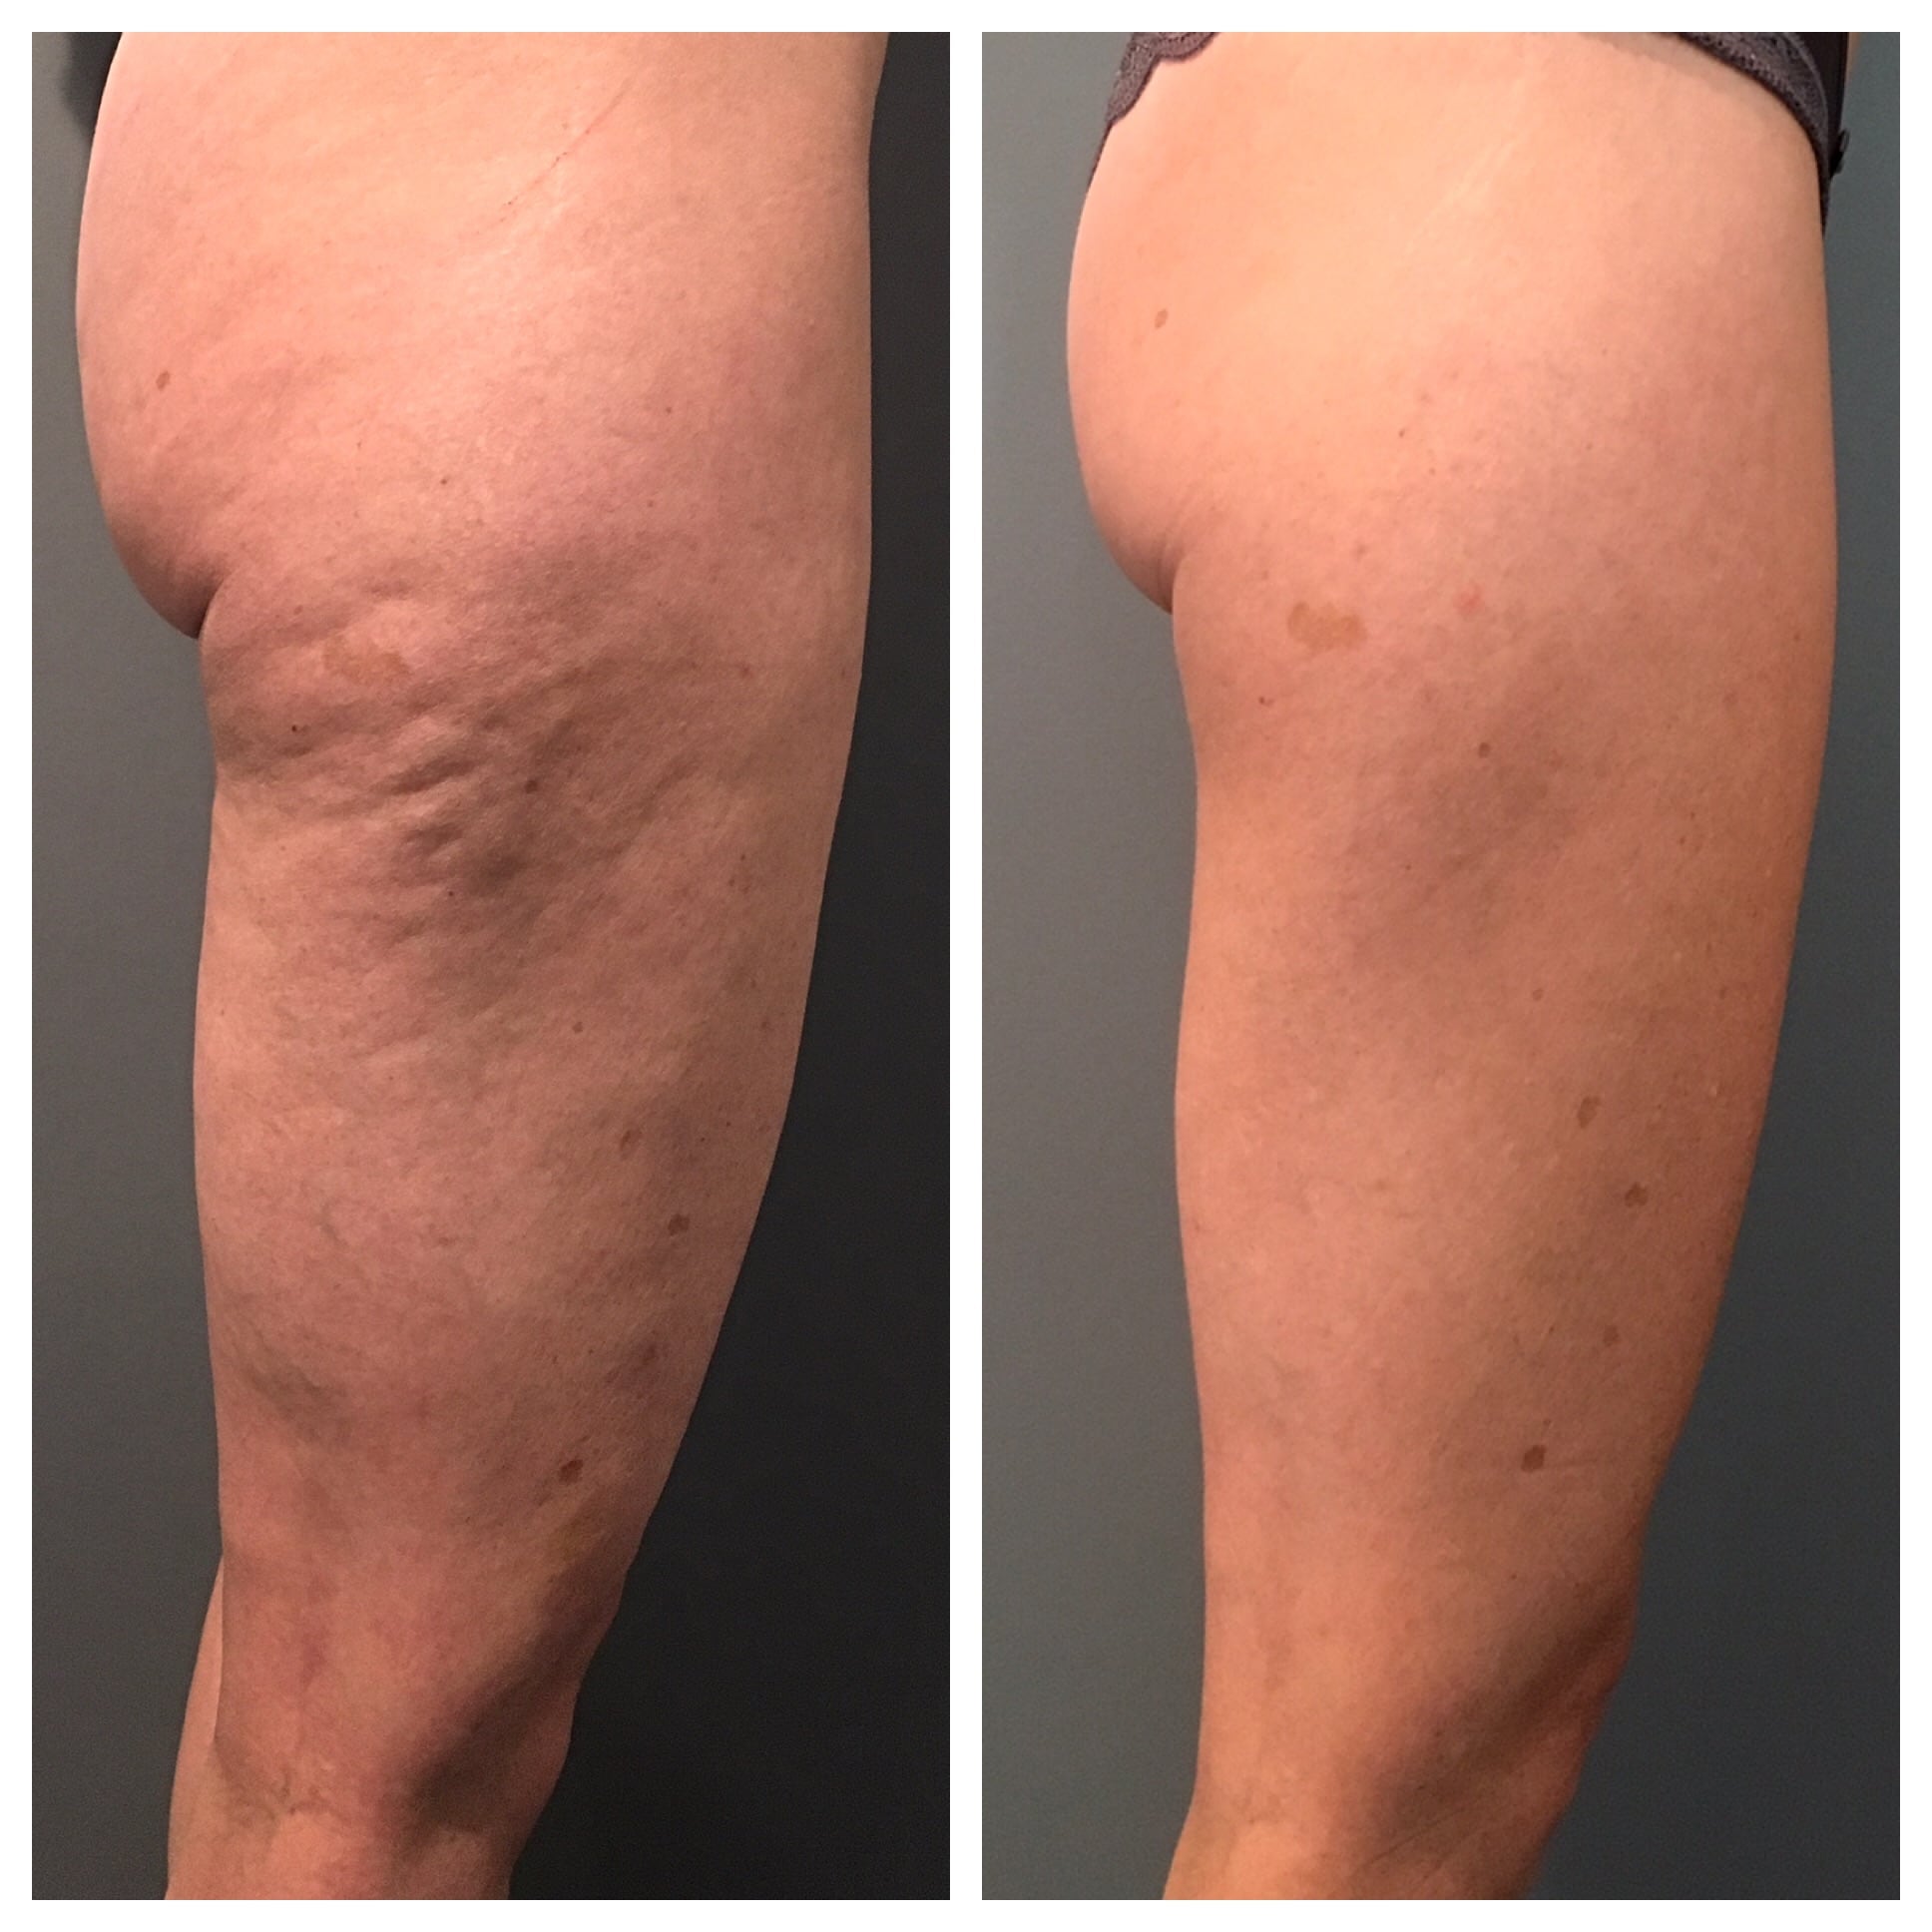 Before and after cellulite treatments